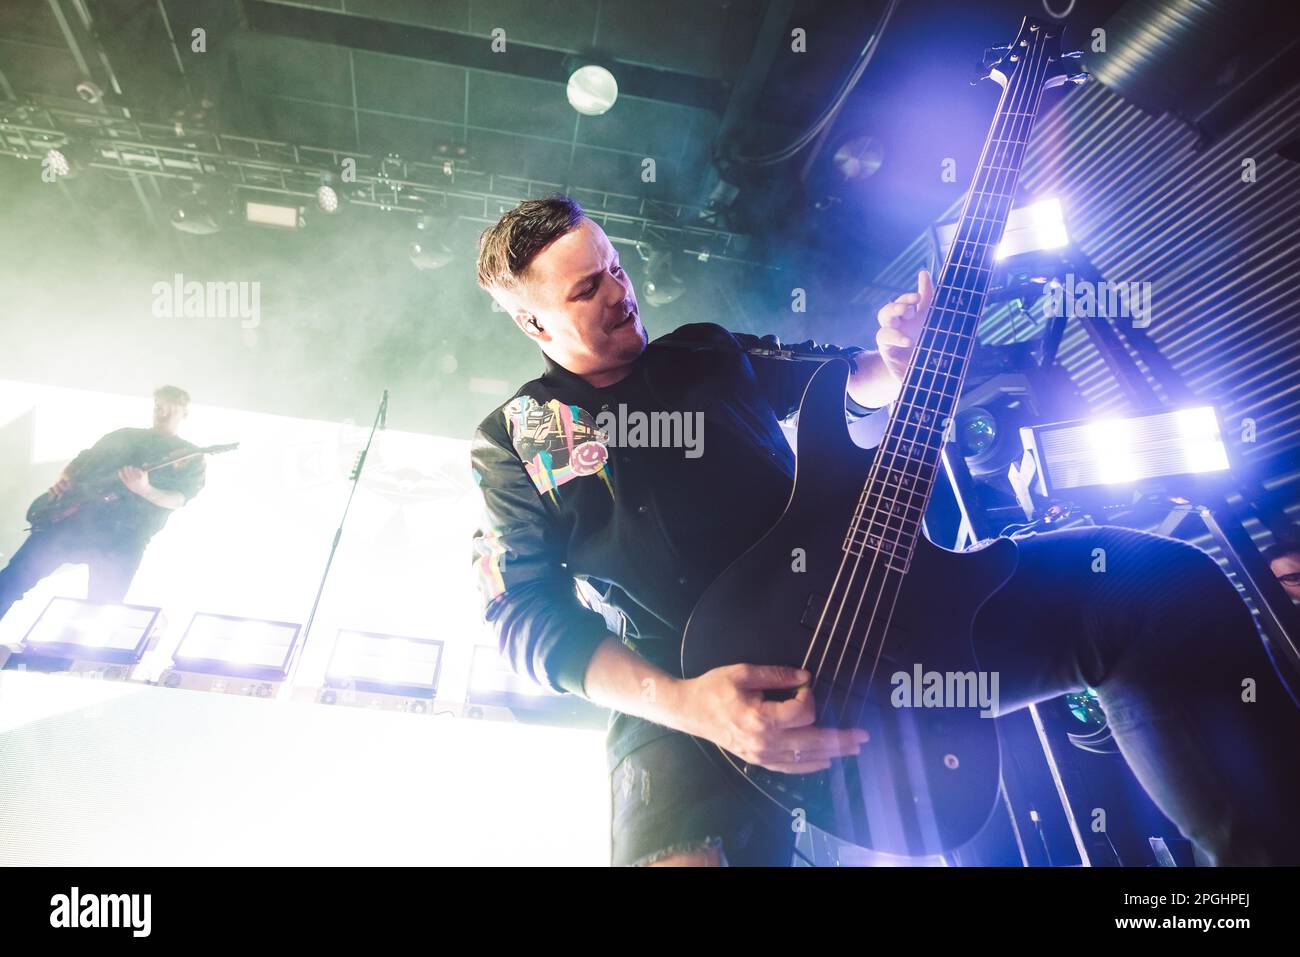 Copenhagen, Denmark. 21st, March 2023. The German electronicore band Electric Callboy performs a live concert at Amager Bio in Copenhagen. Here bass player Daniel Klossek is seen live on stage. (Photo credit: Gonzales Photo - Peter Troest). Stock Photo